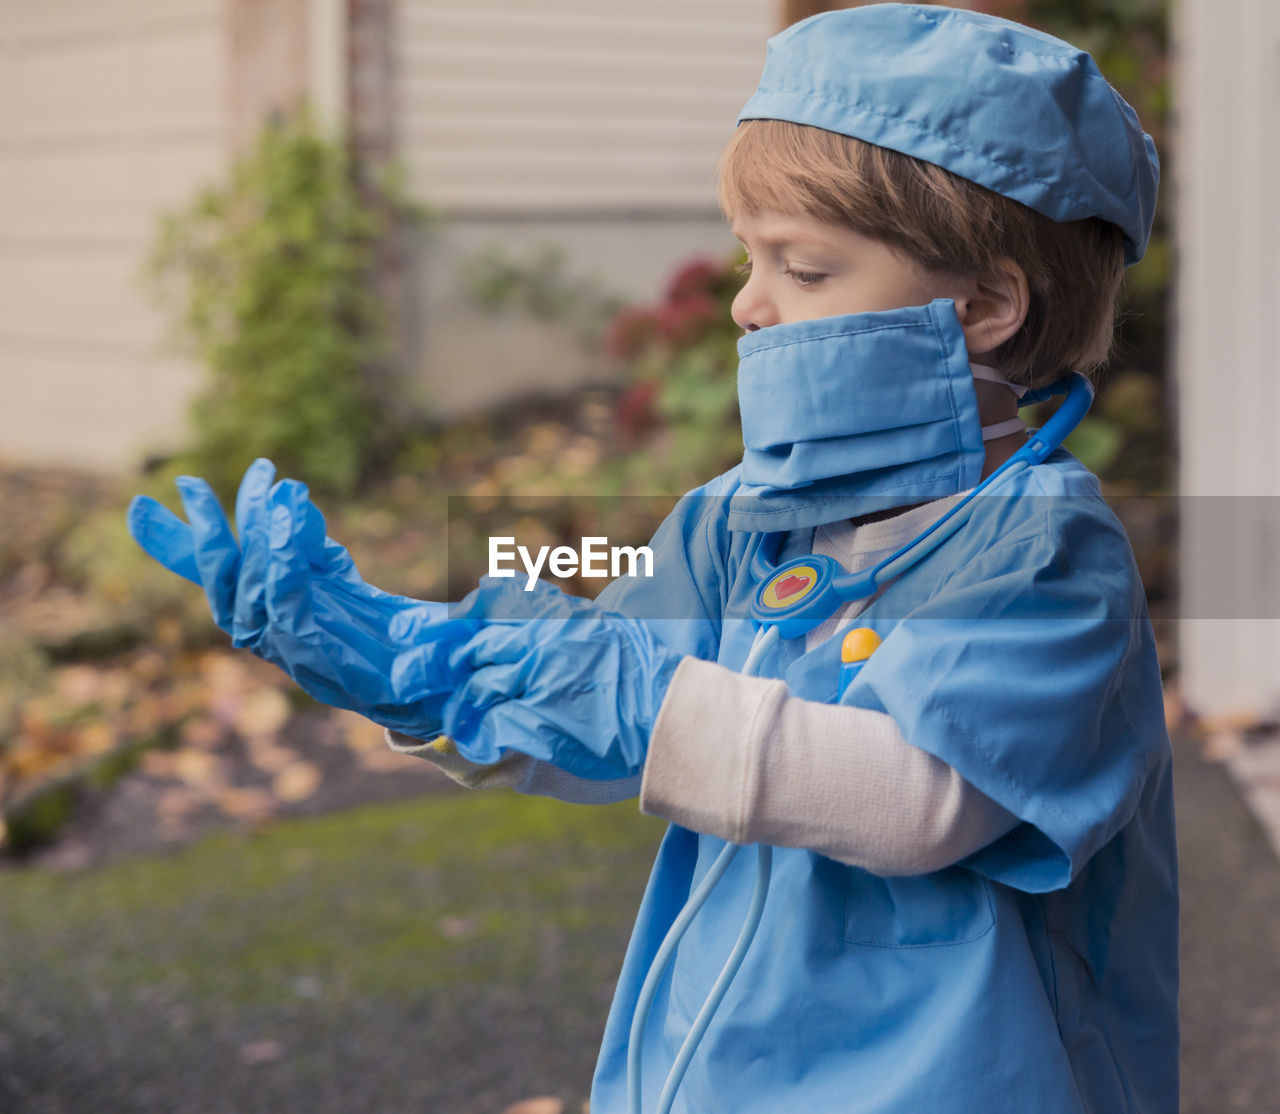 Boy in doctor costume wearing gloves while standing in yard